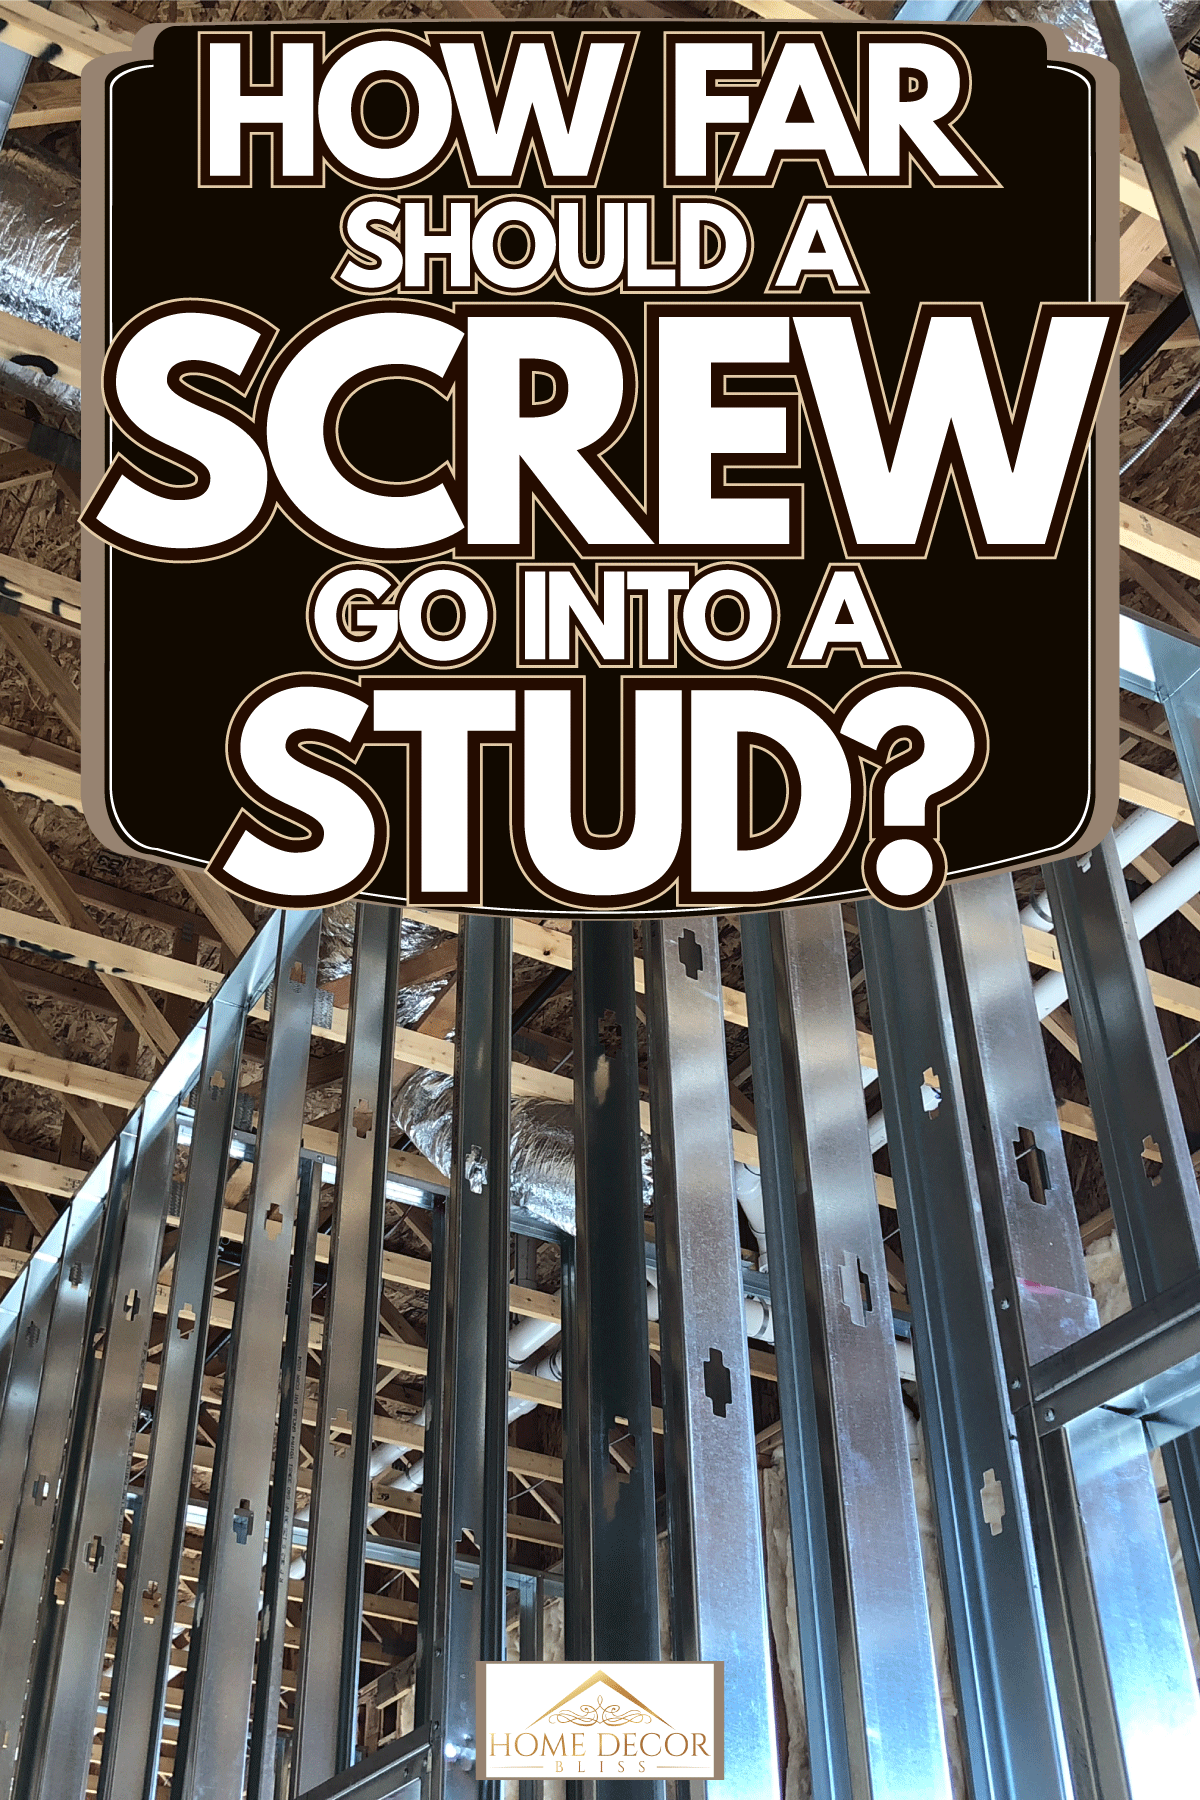 Metal stud framing inside a house under construction, How Far Should A Screw Go Into A Stud?